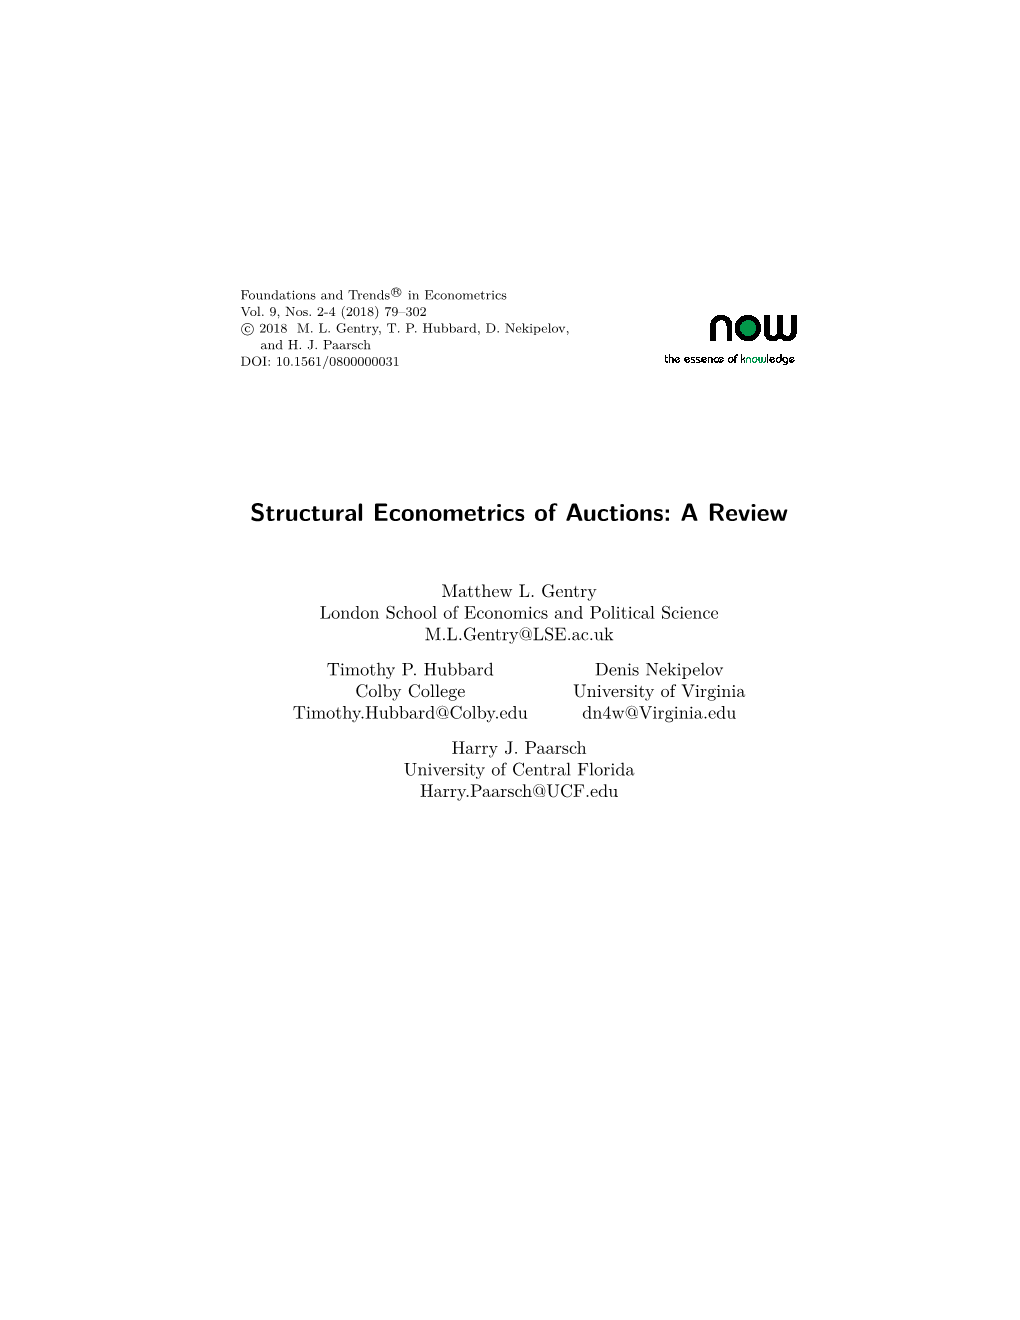 Structural Econometrics of Auctions: a Review